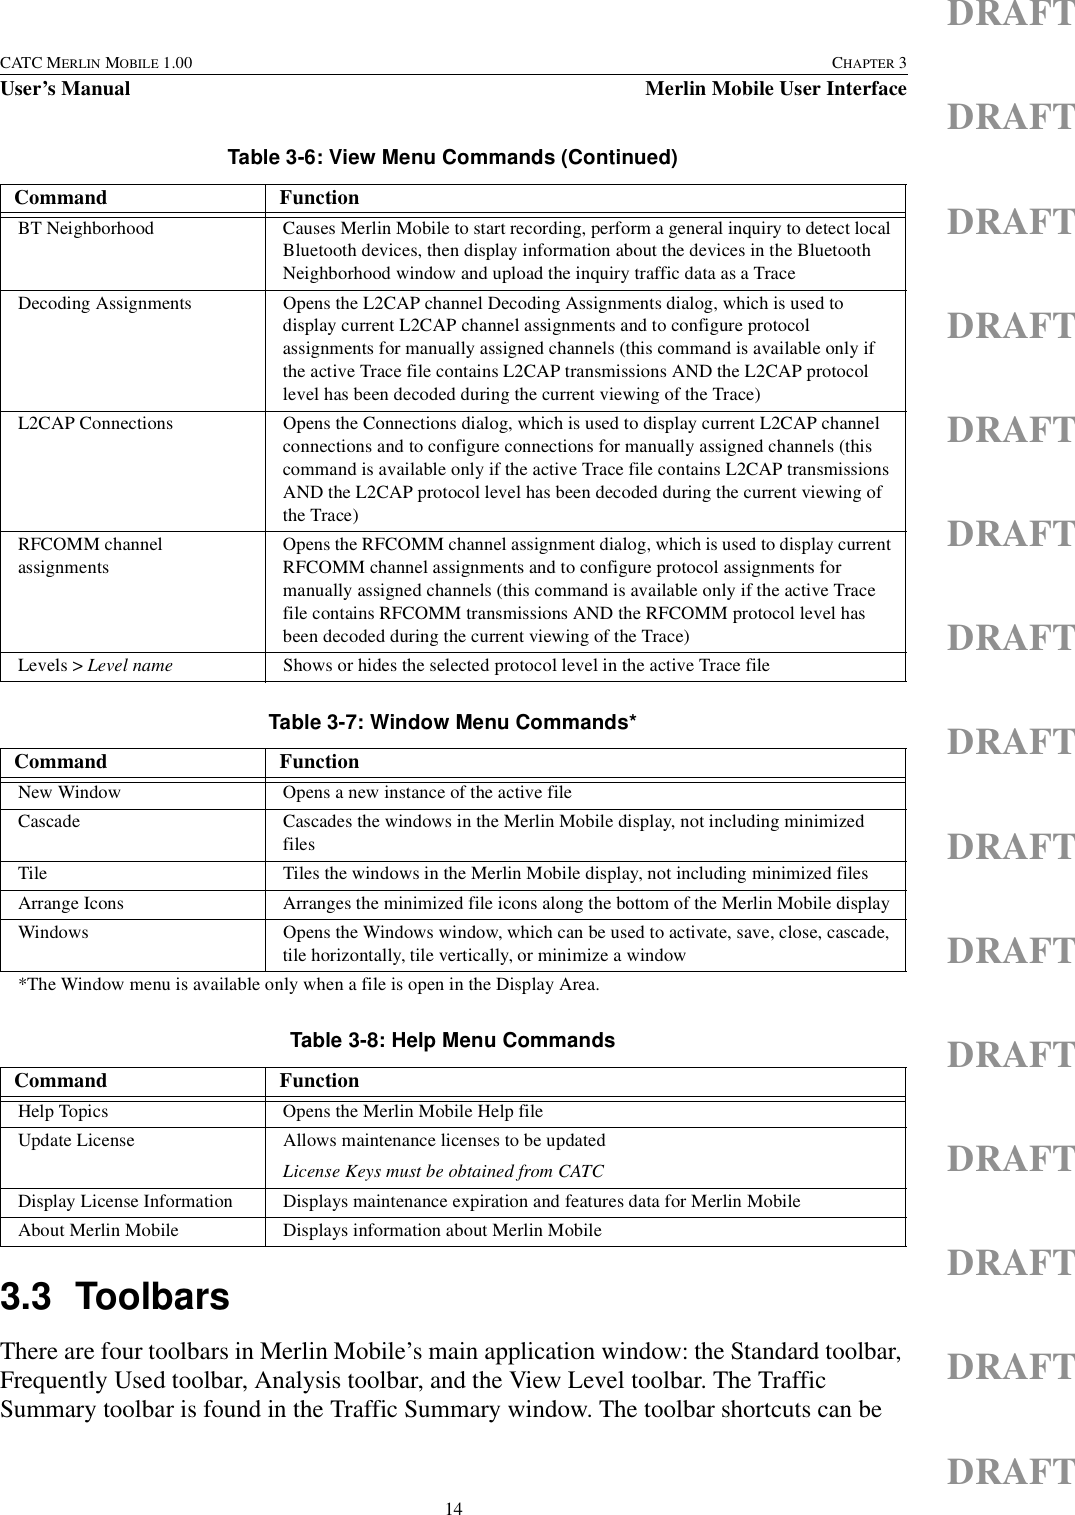 14CATC MERLIN MOBILE 1.00 CHAPTER 3User’s Manual Merlin Mobile User InterfaceDRAFTDRAFTDRAFTDRAFTDRAFTDRAFTDRAFTDRAFTDRAFTDRAFTDRAFTDRAFTDRAFTDRAFTDRAFT3.3 ToolbarsThere are four toolbars in Merlin Mobile’s main application window: the Standard toolbar, Frequently Used toolbar, Analysis toolbar, and the View Level toolbar. The Traffic Summary toolbar is found in the Traffic Summary window. The toolbar shortcuts can be BT Neighborhood Causes Merlin Mobile to start recording, perform a general inquiry to detect local Bluetooth devices, then display information about the devices in the Bluetooth Neighborhood window and upload the inquiry traffic data as a TraceDecoding Assignments Opens the L2CAP channel Decoding Assignments dialog, which is used to display current L2CAP channel assignments and to configure protocol assignments for manually assigned channels (this command is available only if the active Trace file contains L2CAP transmissions AND the L2CAP protocol level has been decoded during the current viewing of the Trace)L2CAP Connections Opens the Connections dialog, which is used to display current L2CAP channel connections and to configure connections for manually assigned channels (this command is available only if the active Trace file contains L2CAP transmissions AND the L2CAP protocol level has been decoded during the current viewing of the Trace)RFCOMM channel assignmentsOpens the RFCOMM channel assignment dialog, which is used to display current RFCOMM channel assignments and to configure protocol assignments for manually assigned channels (this command is available only if the active Trace file contains RFCOMM transmissions AND the RFCOMM protocol level has been decoded during the current viewing of the Trace)Levels &gt; Level name Shows or hides the selected protocol level in the active Trace fileTable 3-7: Window Menu Commands*Command FunctionNew Window Opens a new instance of the active fileCascade Cascades the windows in the Merlin Mobile display, not including minimized filesTile Tiles the windows in the Merlin Mobile display, not including minimized filesArrange Icons Arranges the minimized file icons along the bottom of the Merlin Mobile displayWindows Opens the Windows window, which can be used to activate, save, close, cascade, tile horizontally, tile vertically, or minimize a window*The Window menu is available only when a file is open in the Display Area.Table 3-8: Help Menu CommandsCommand FunctionHelp Topics Opens the Merlin Mobile Help fileUpdate License Allows maintenance licenses to be updatedLicense Keys must be obtained from CATCDisplay License Information Displays maintenance expiration and features data for Merlin MobileAbout Merlin Mobile Displays information about Merlin MobileTable 3-6: View Menu Commands (Continued)Command Function